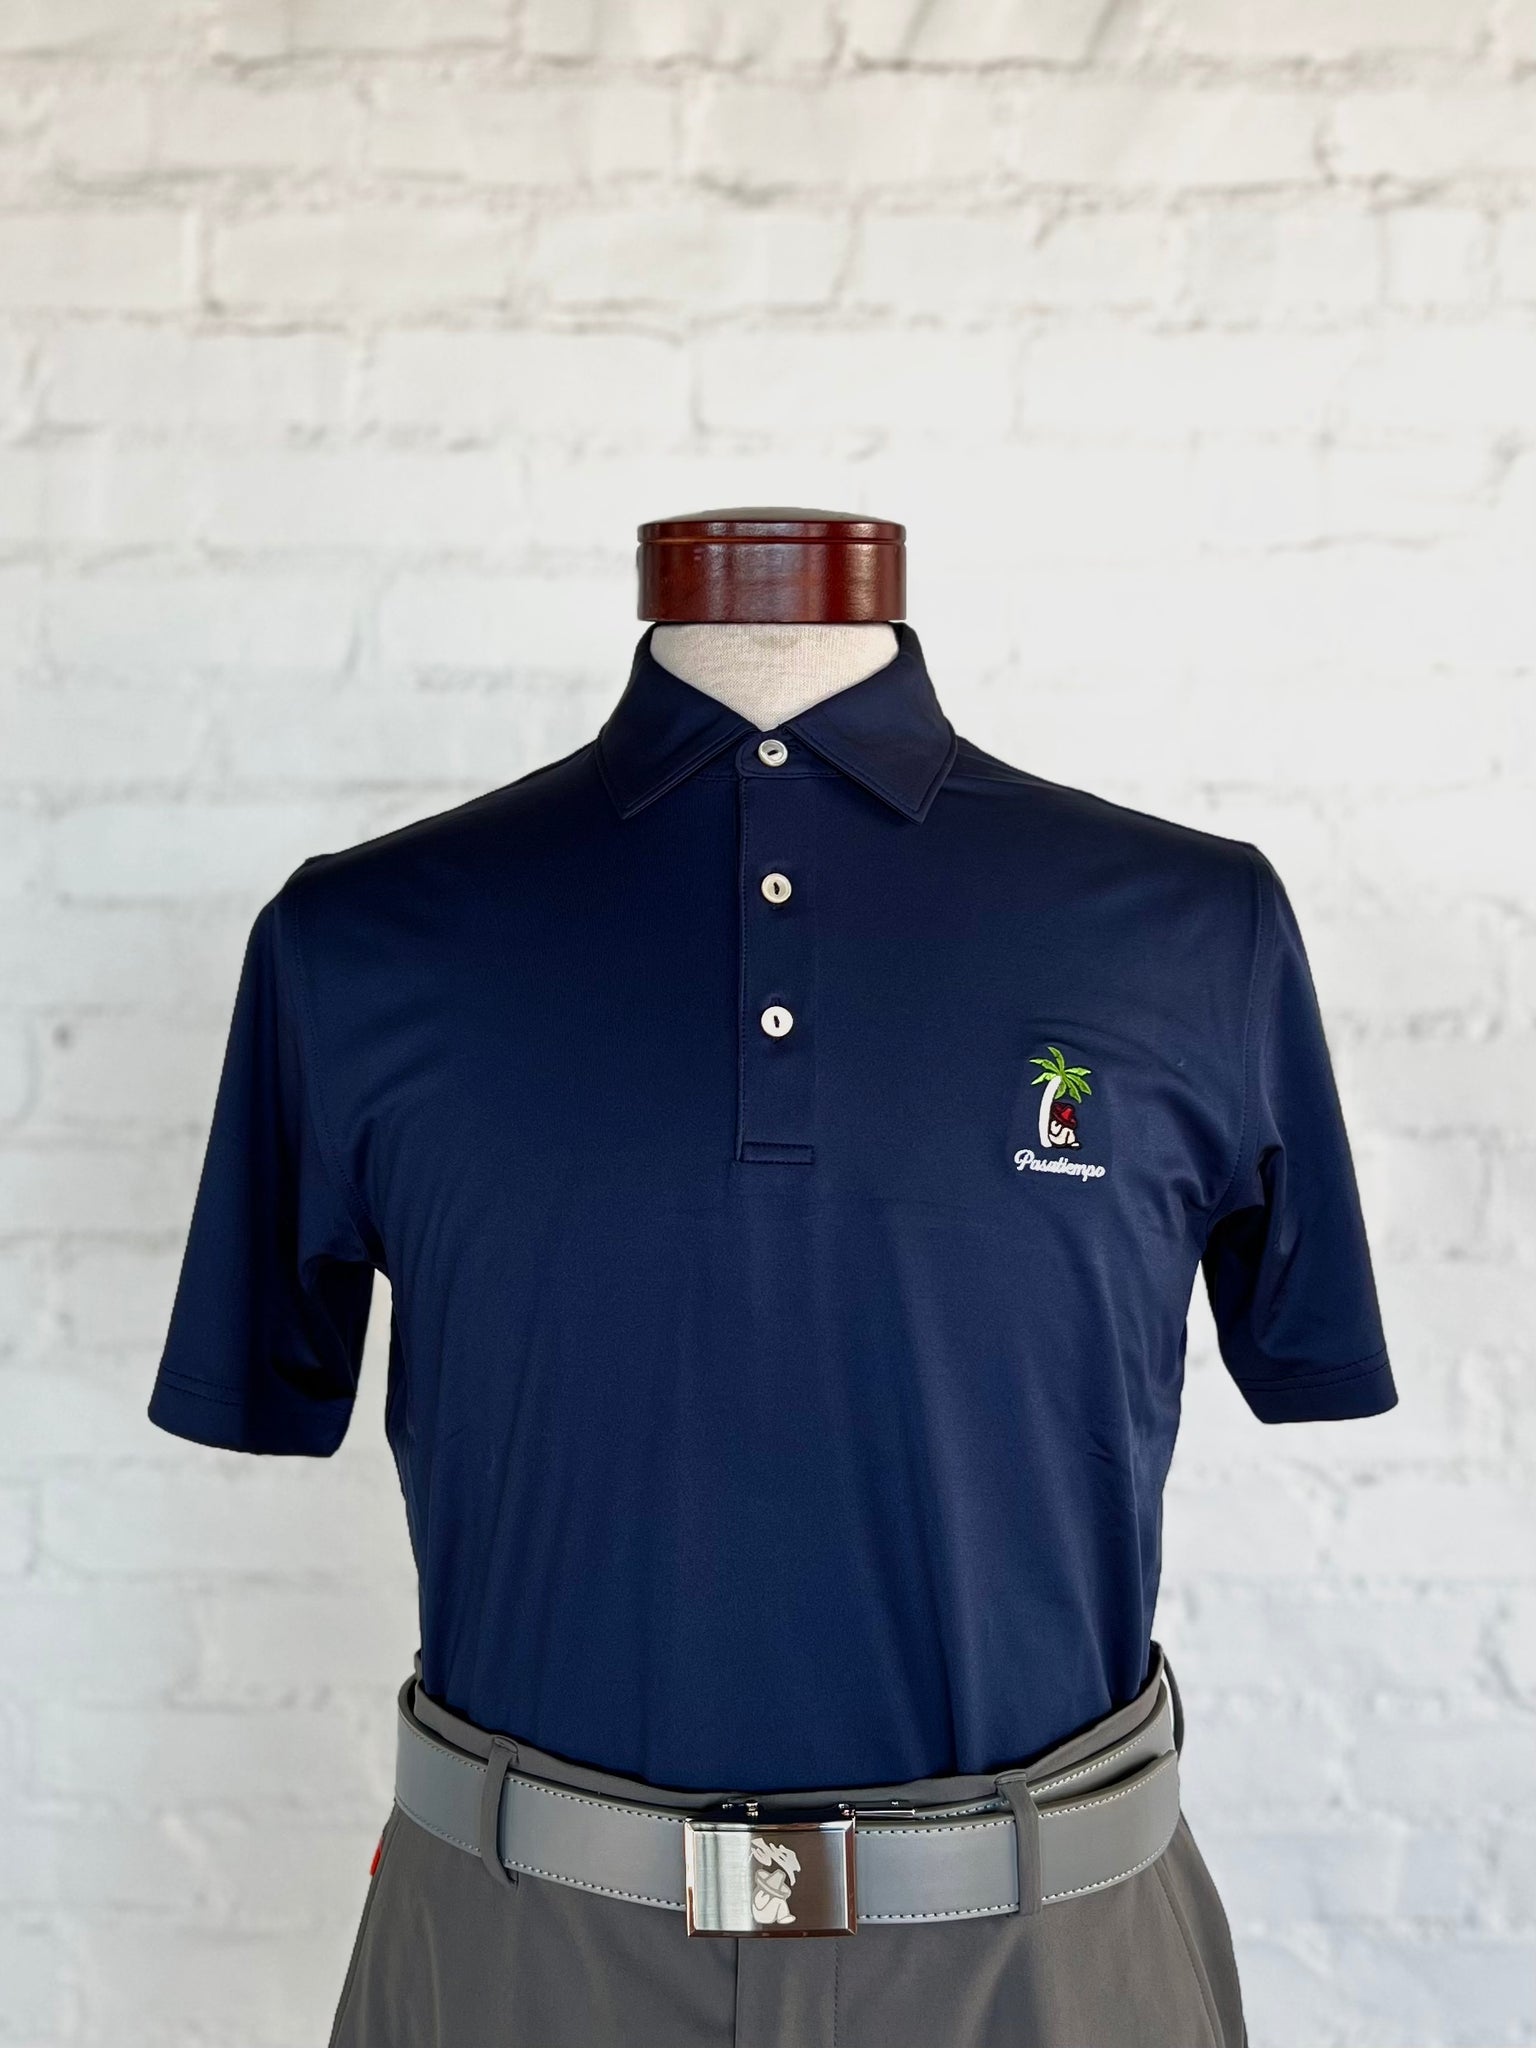 Peter Millar - “Solid Performance Polo” - Navy